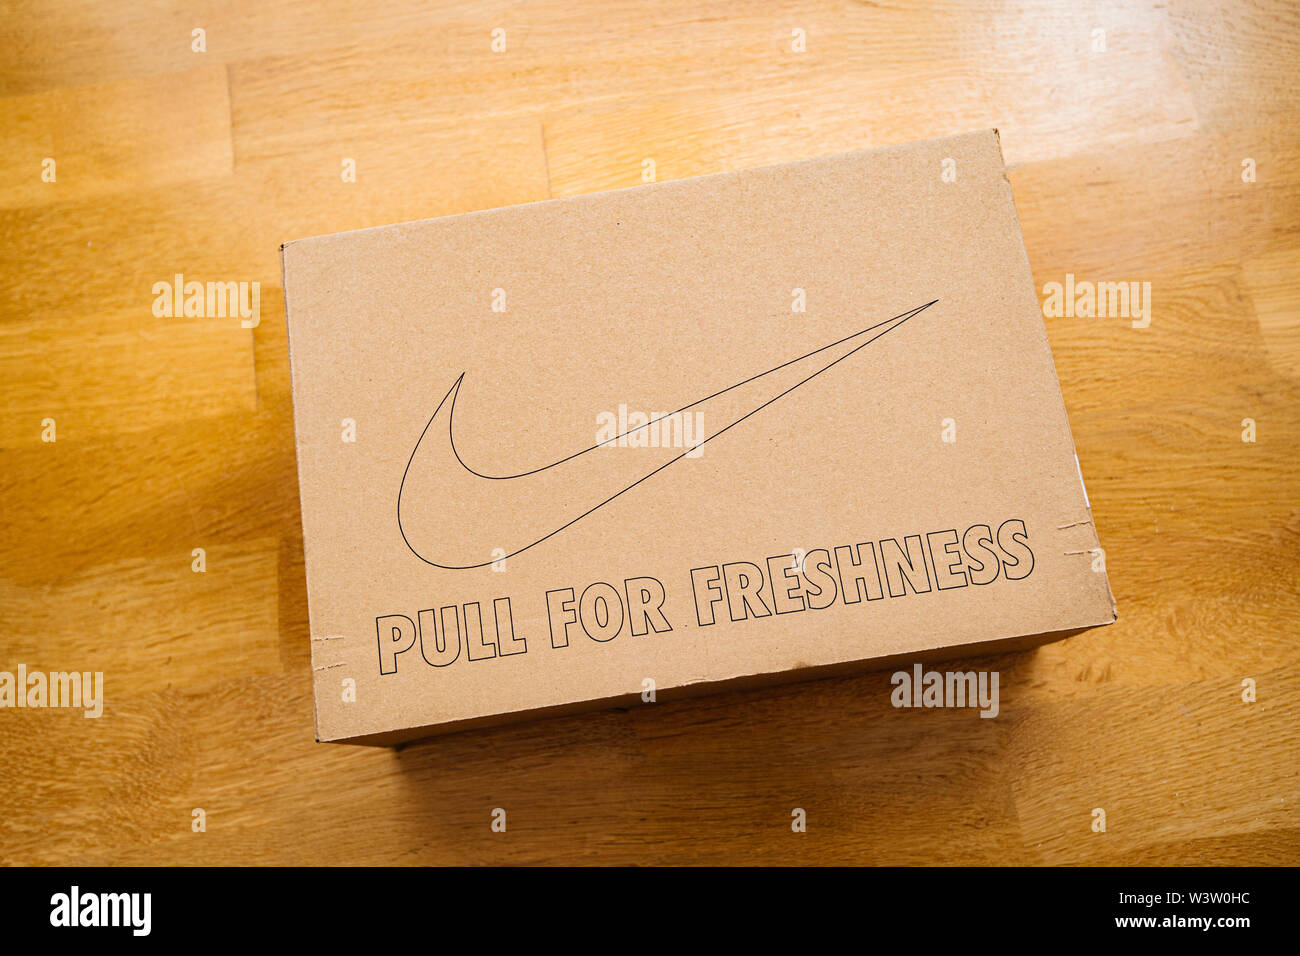 Paris France - Jul 7 2019: Man hand Above view unboxing unpacking sport  running shoes equipment manufactured by Nike sportswear - Pull for  freshness and logotype Stock Photo - Alamy